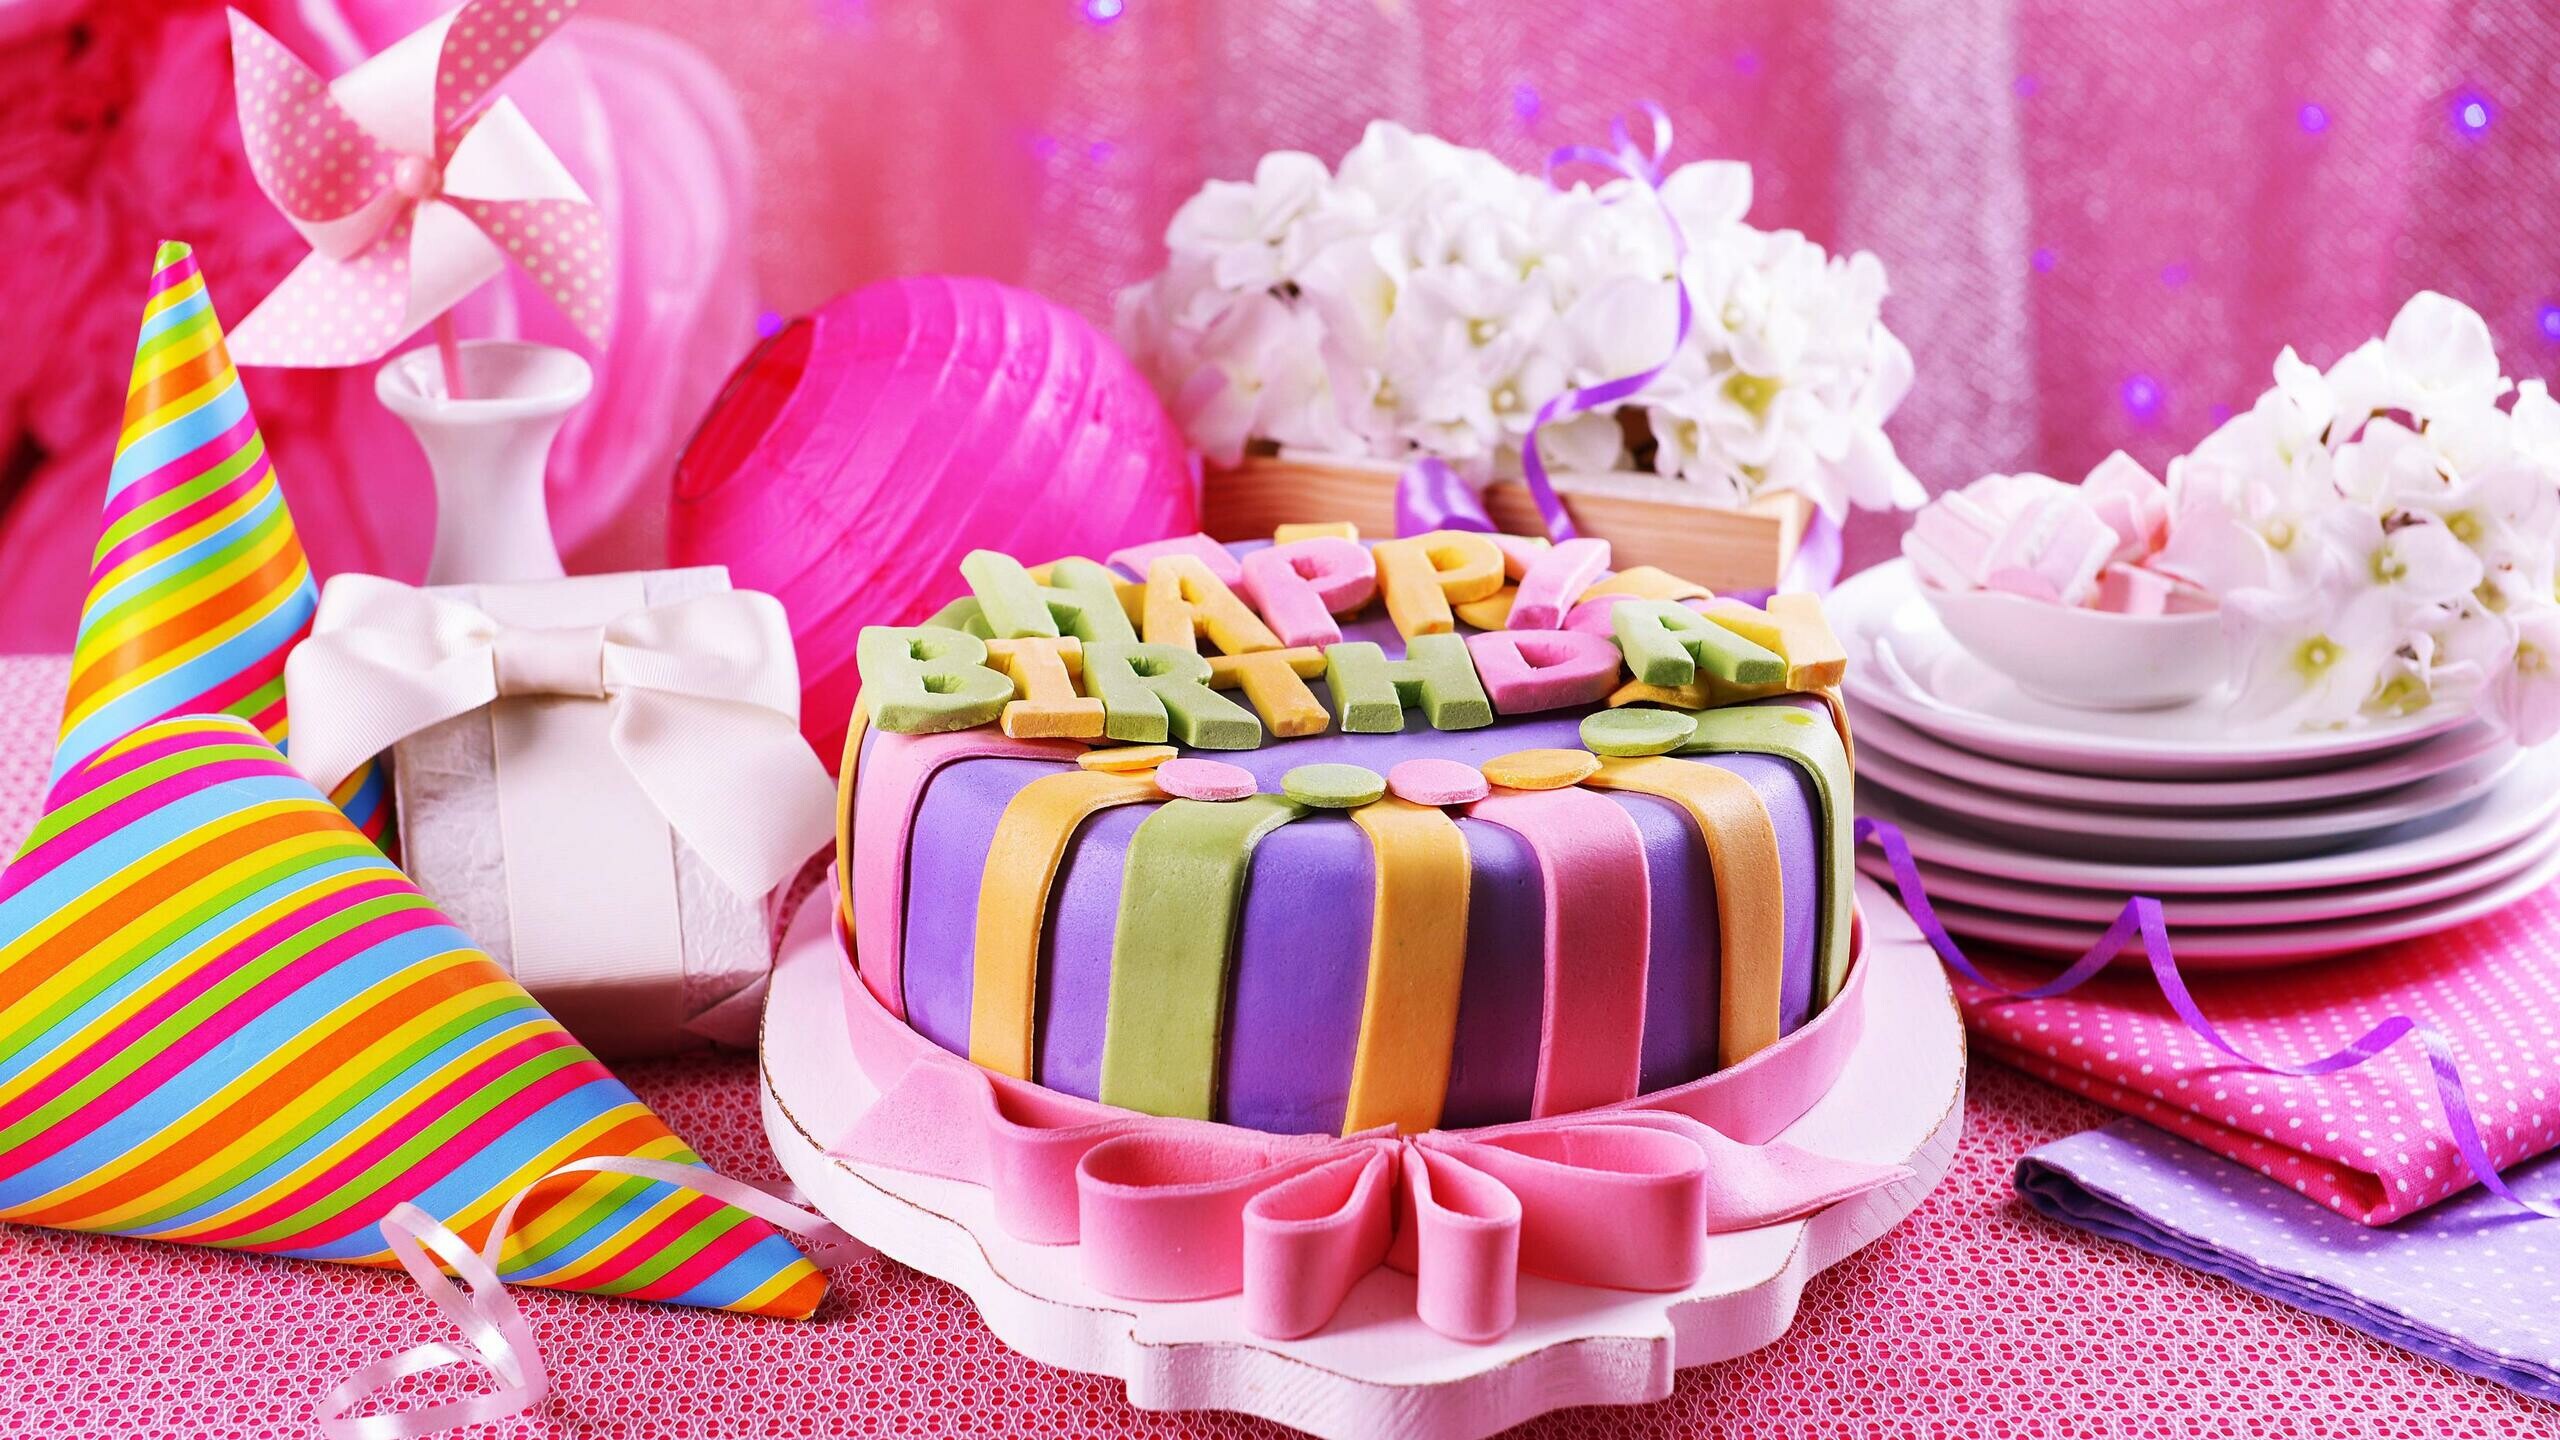 Birthday Party: A cake is eaten as part of a celebration. 2560x1440 HD Wallpaper.